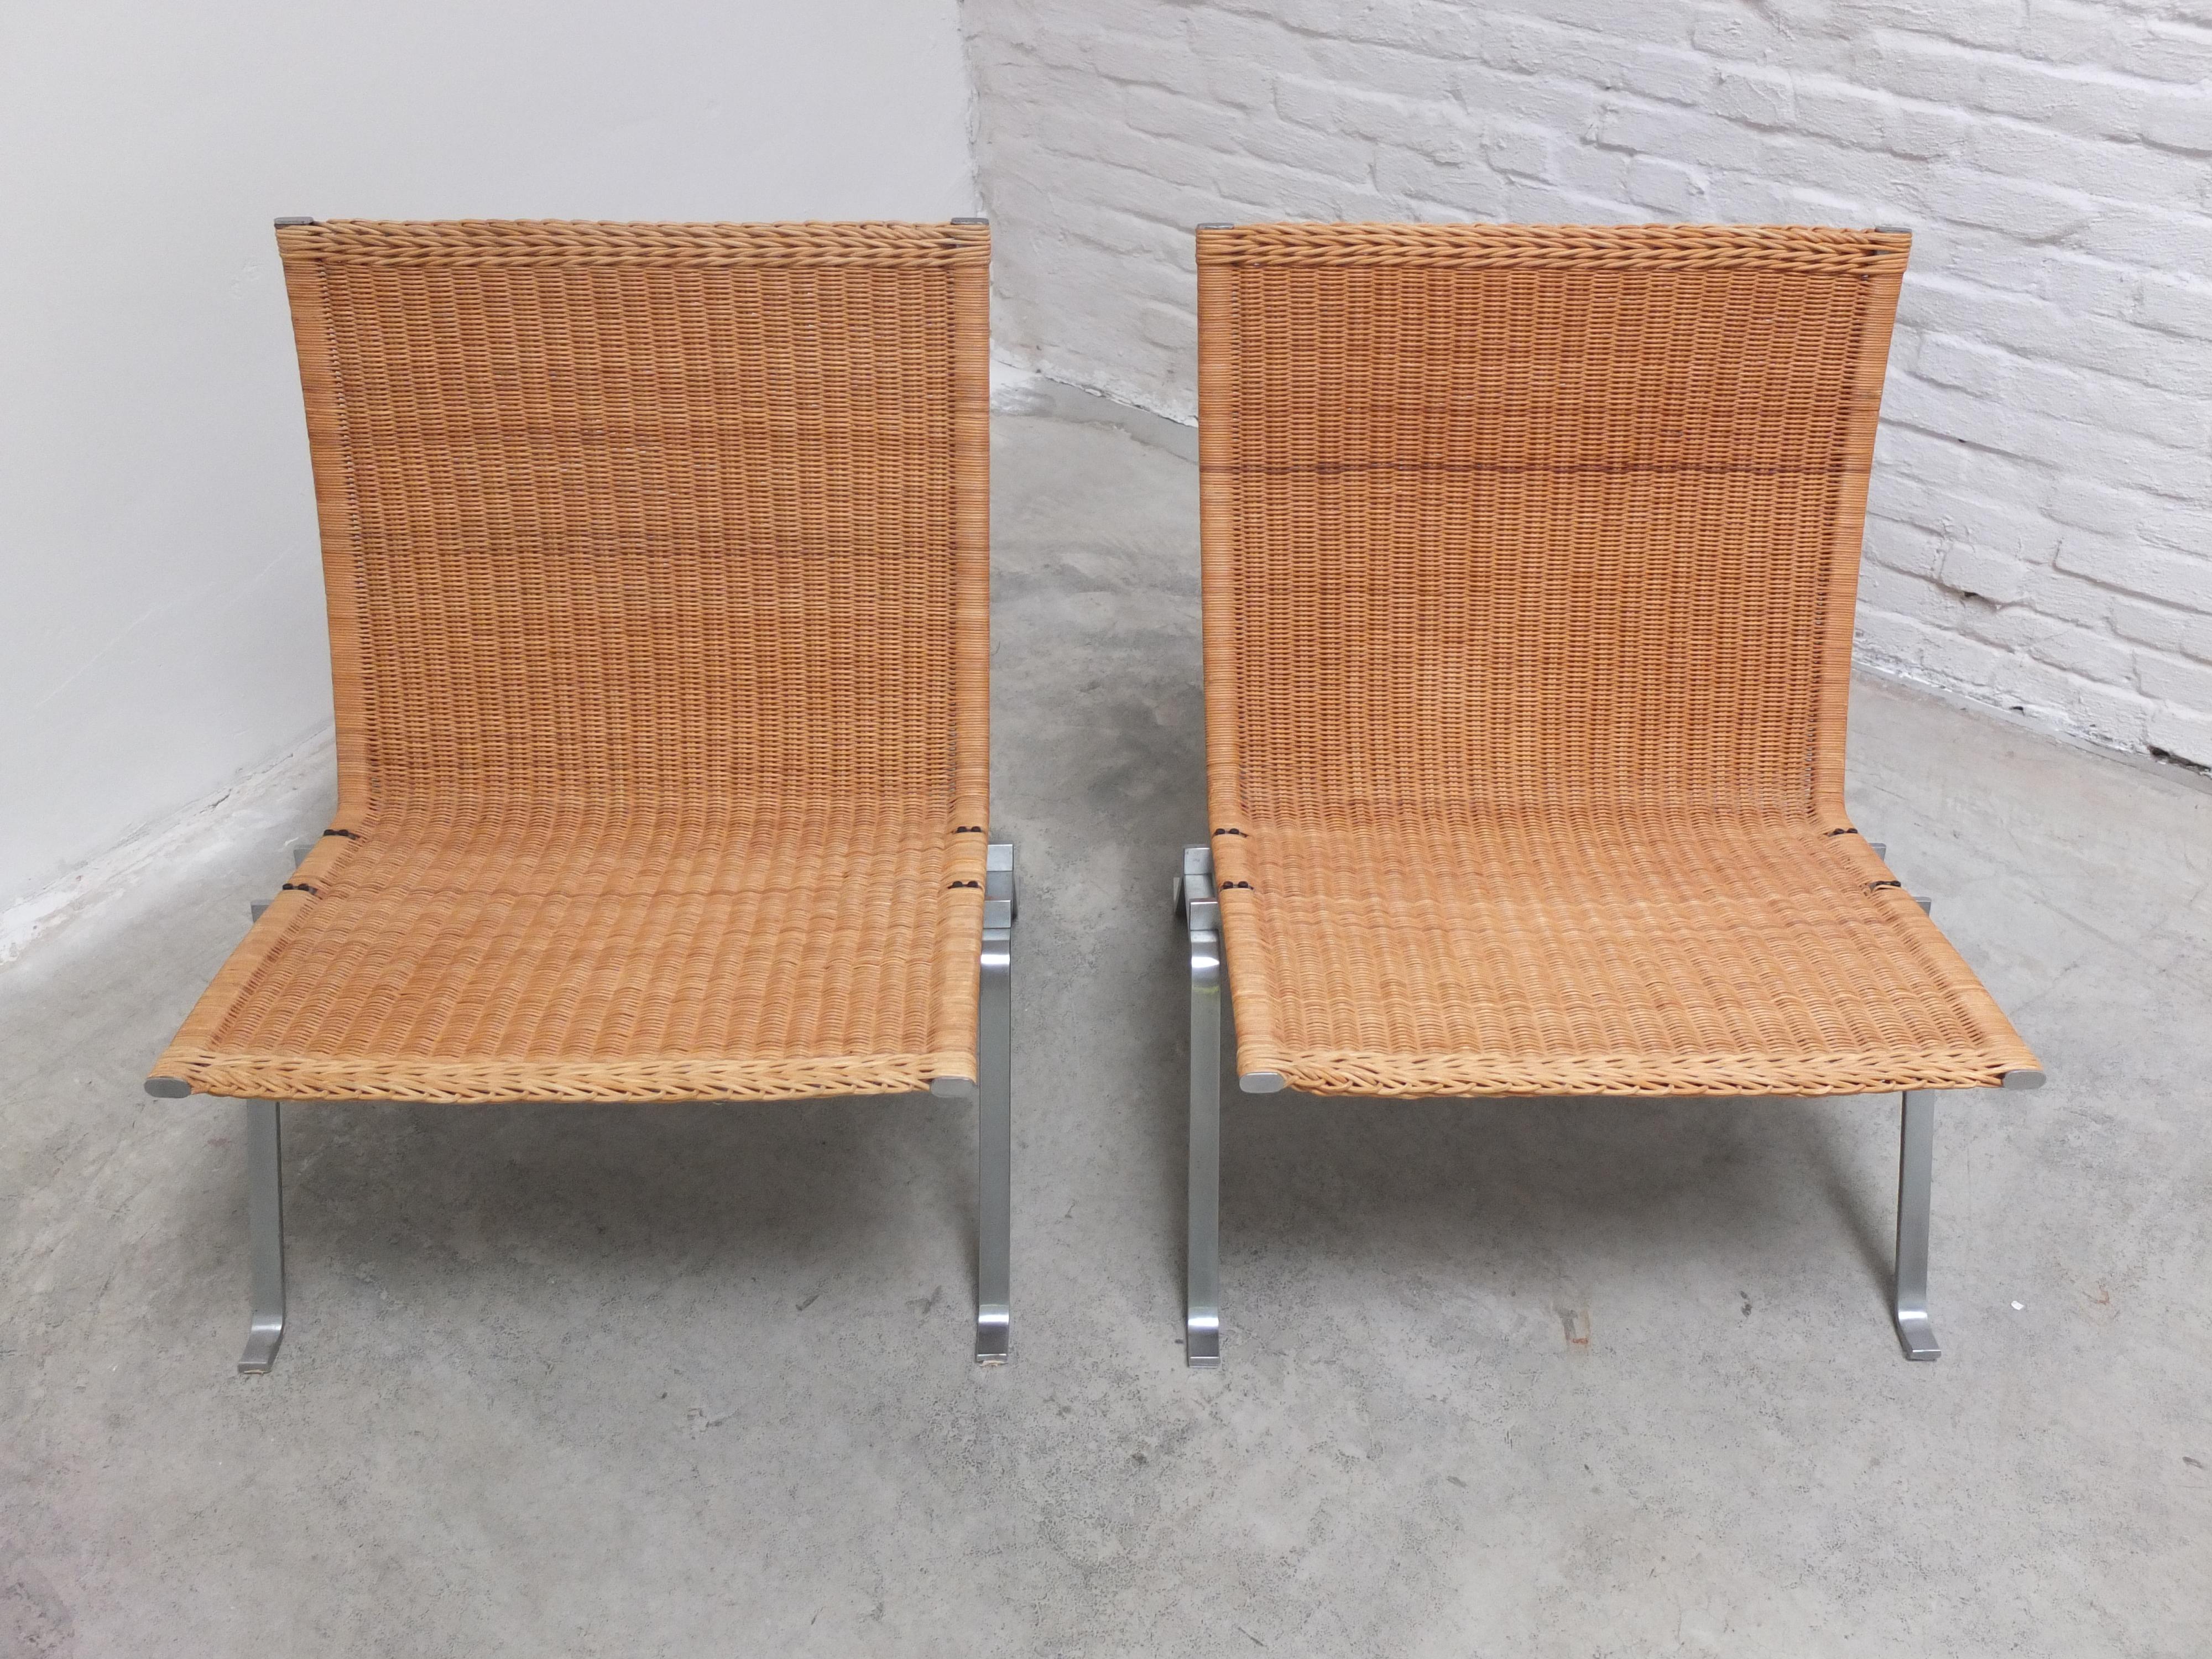 20th Century Early Pair of Wicker 'PK22' Easy Chairs by Poul Kjaerholm for Fritz Hansen, 1986